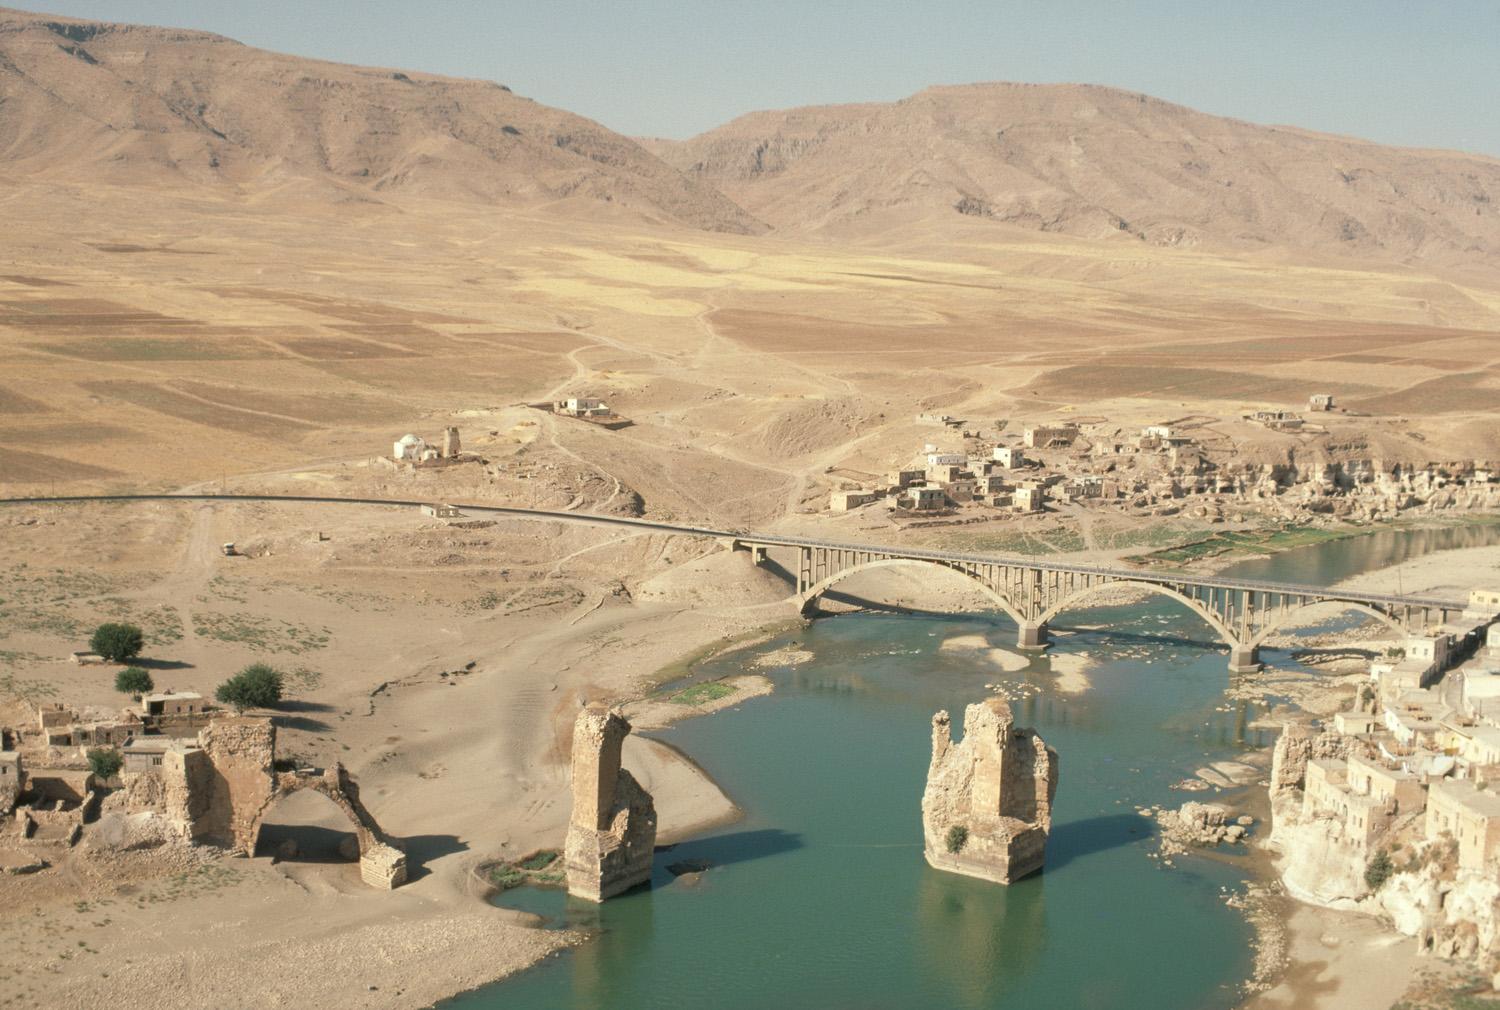 Remaining piers across the Tigris at Hasankeyf, looking west